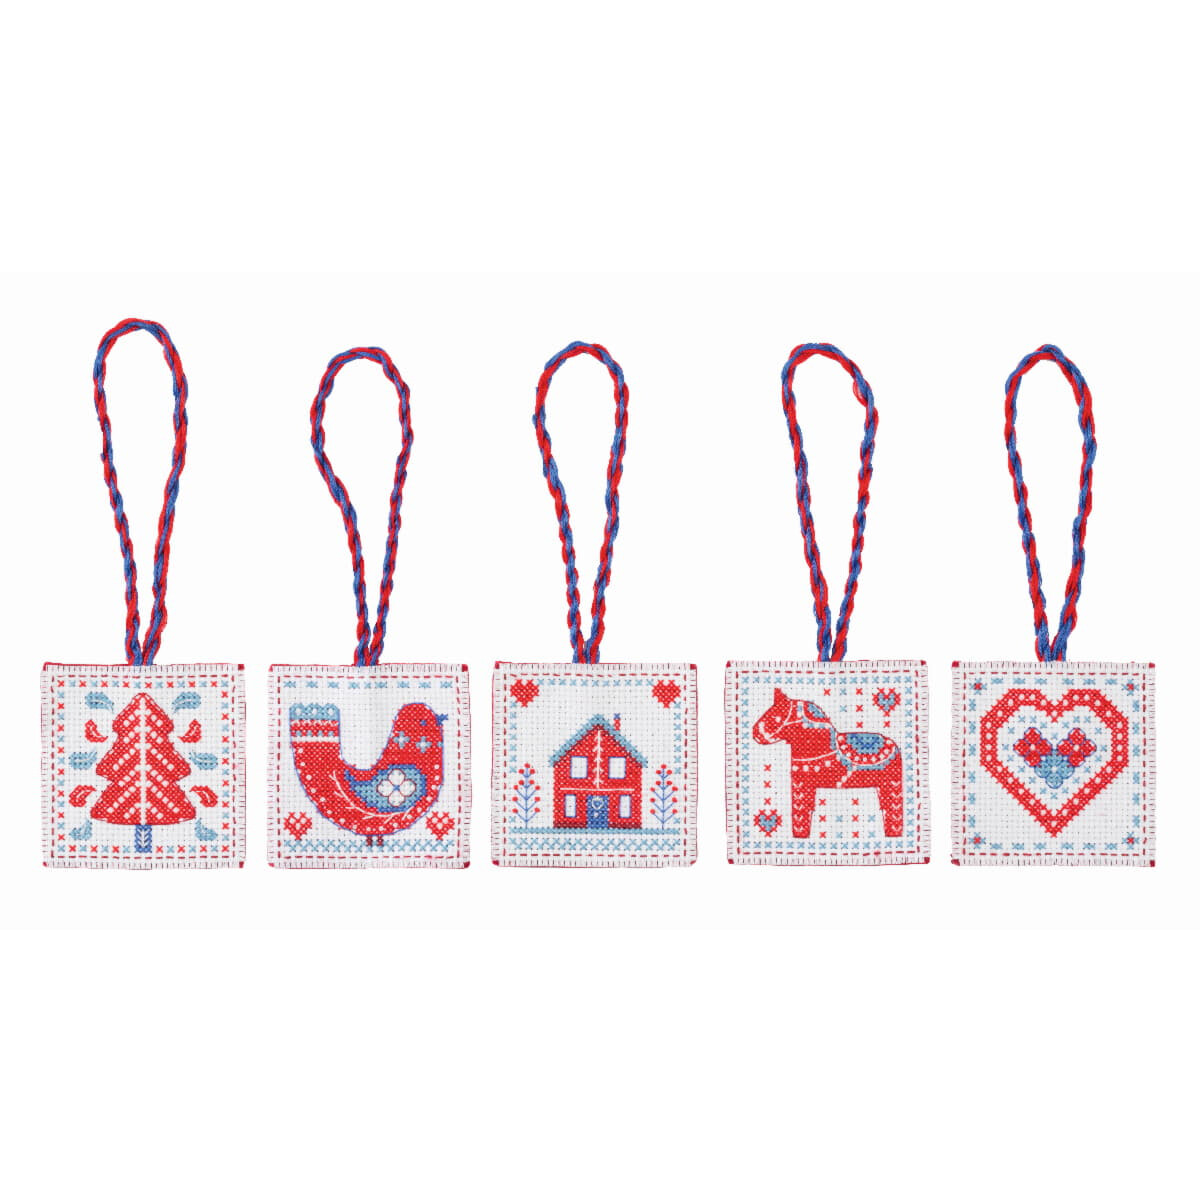 Anchor counted cross stitch kit "Hanger Nordic...